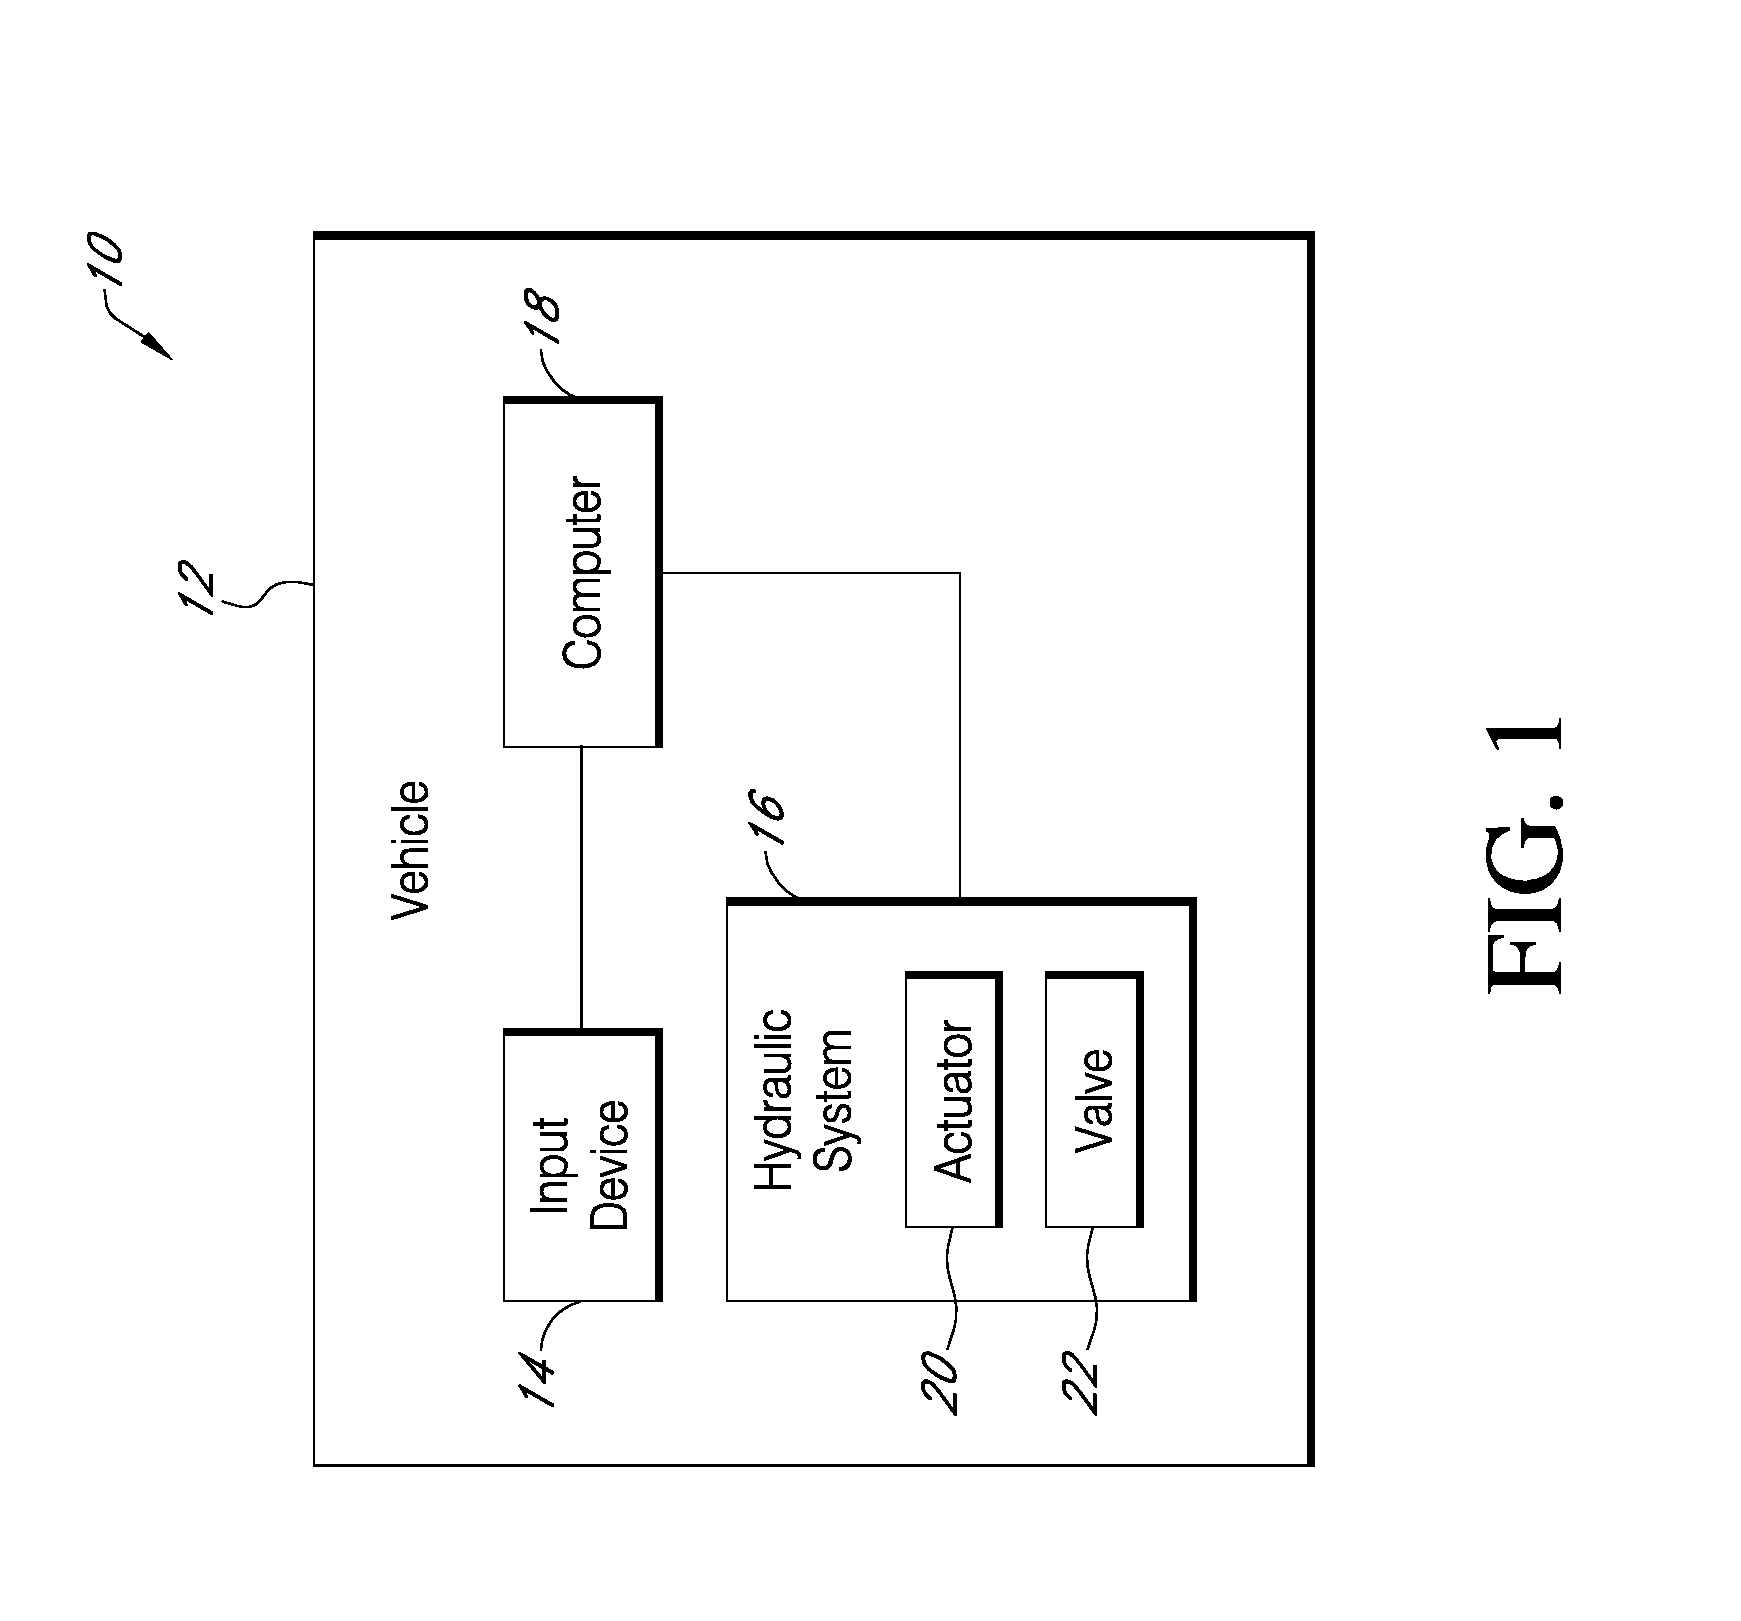 Load dependent electronic valve actuator regulation and pressure compensation